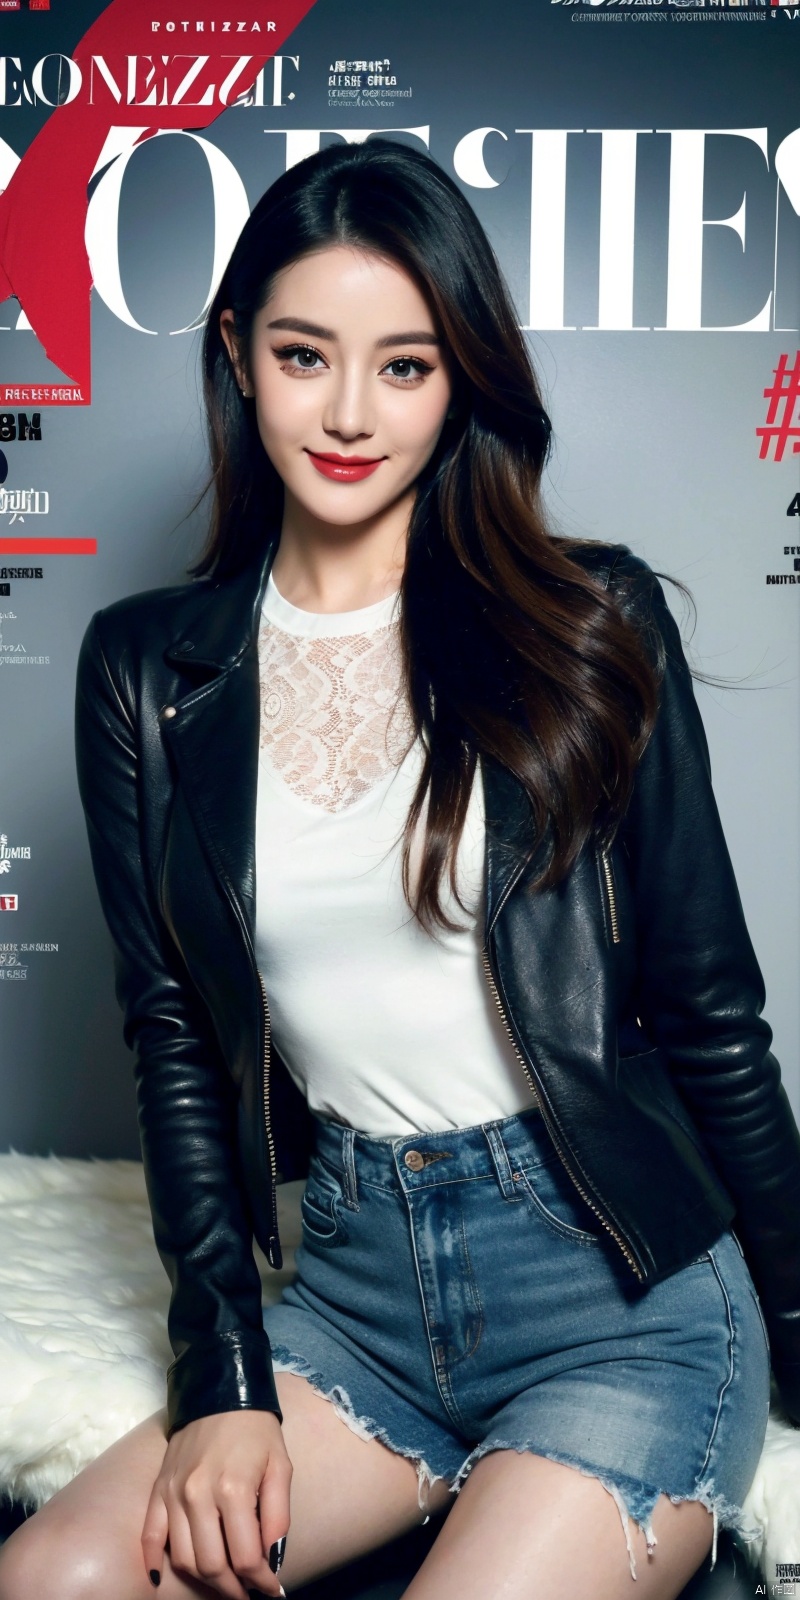  80sDBA style, fashion, (magazine: 1.3), (cover style: 1.3),Best quality, masterpiece, high-resolution, 4K, 1 girl, smile, exquisite makeup,shirt,jean,jacket , lace, tv,boombox
,, , ,long_hair